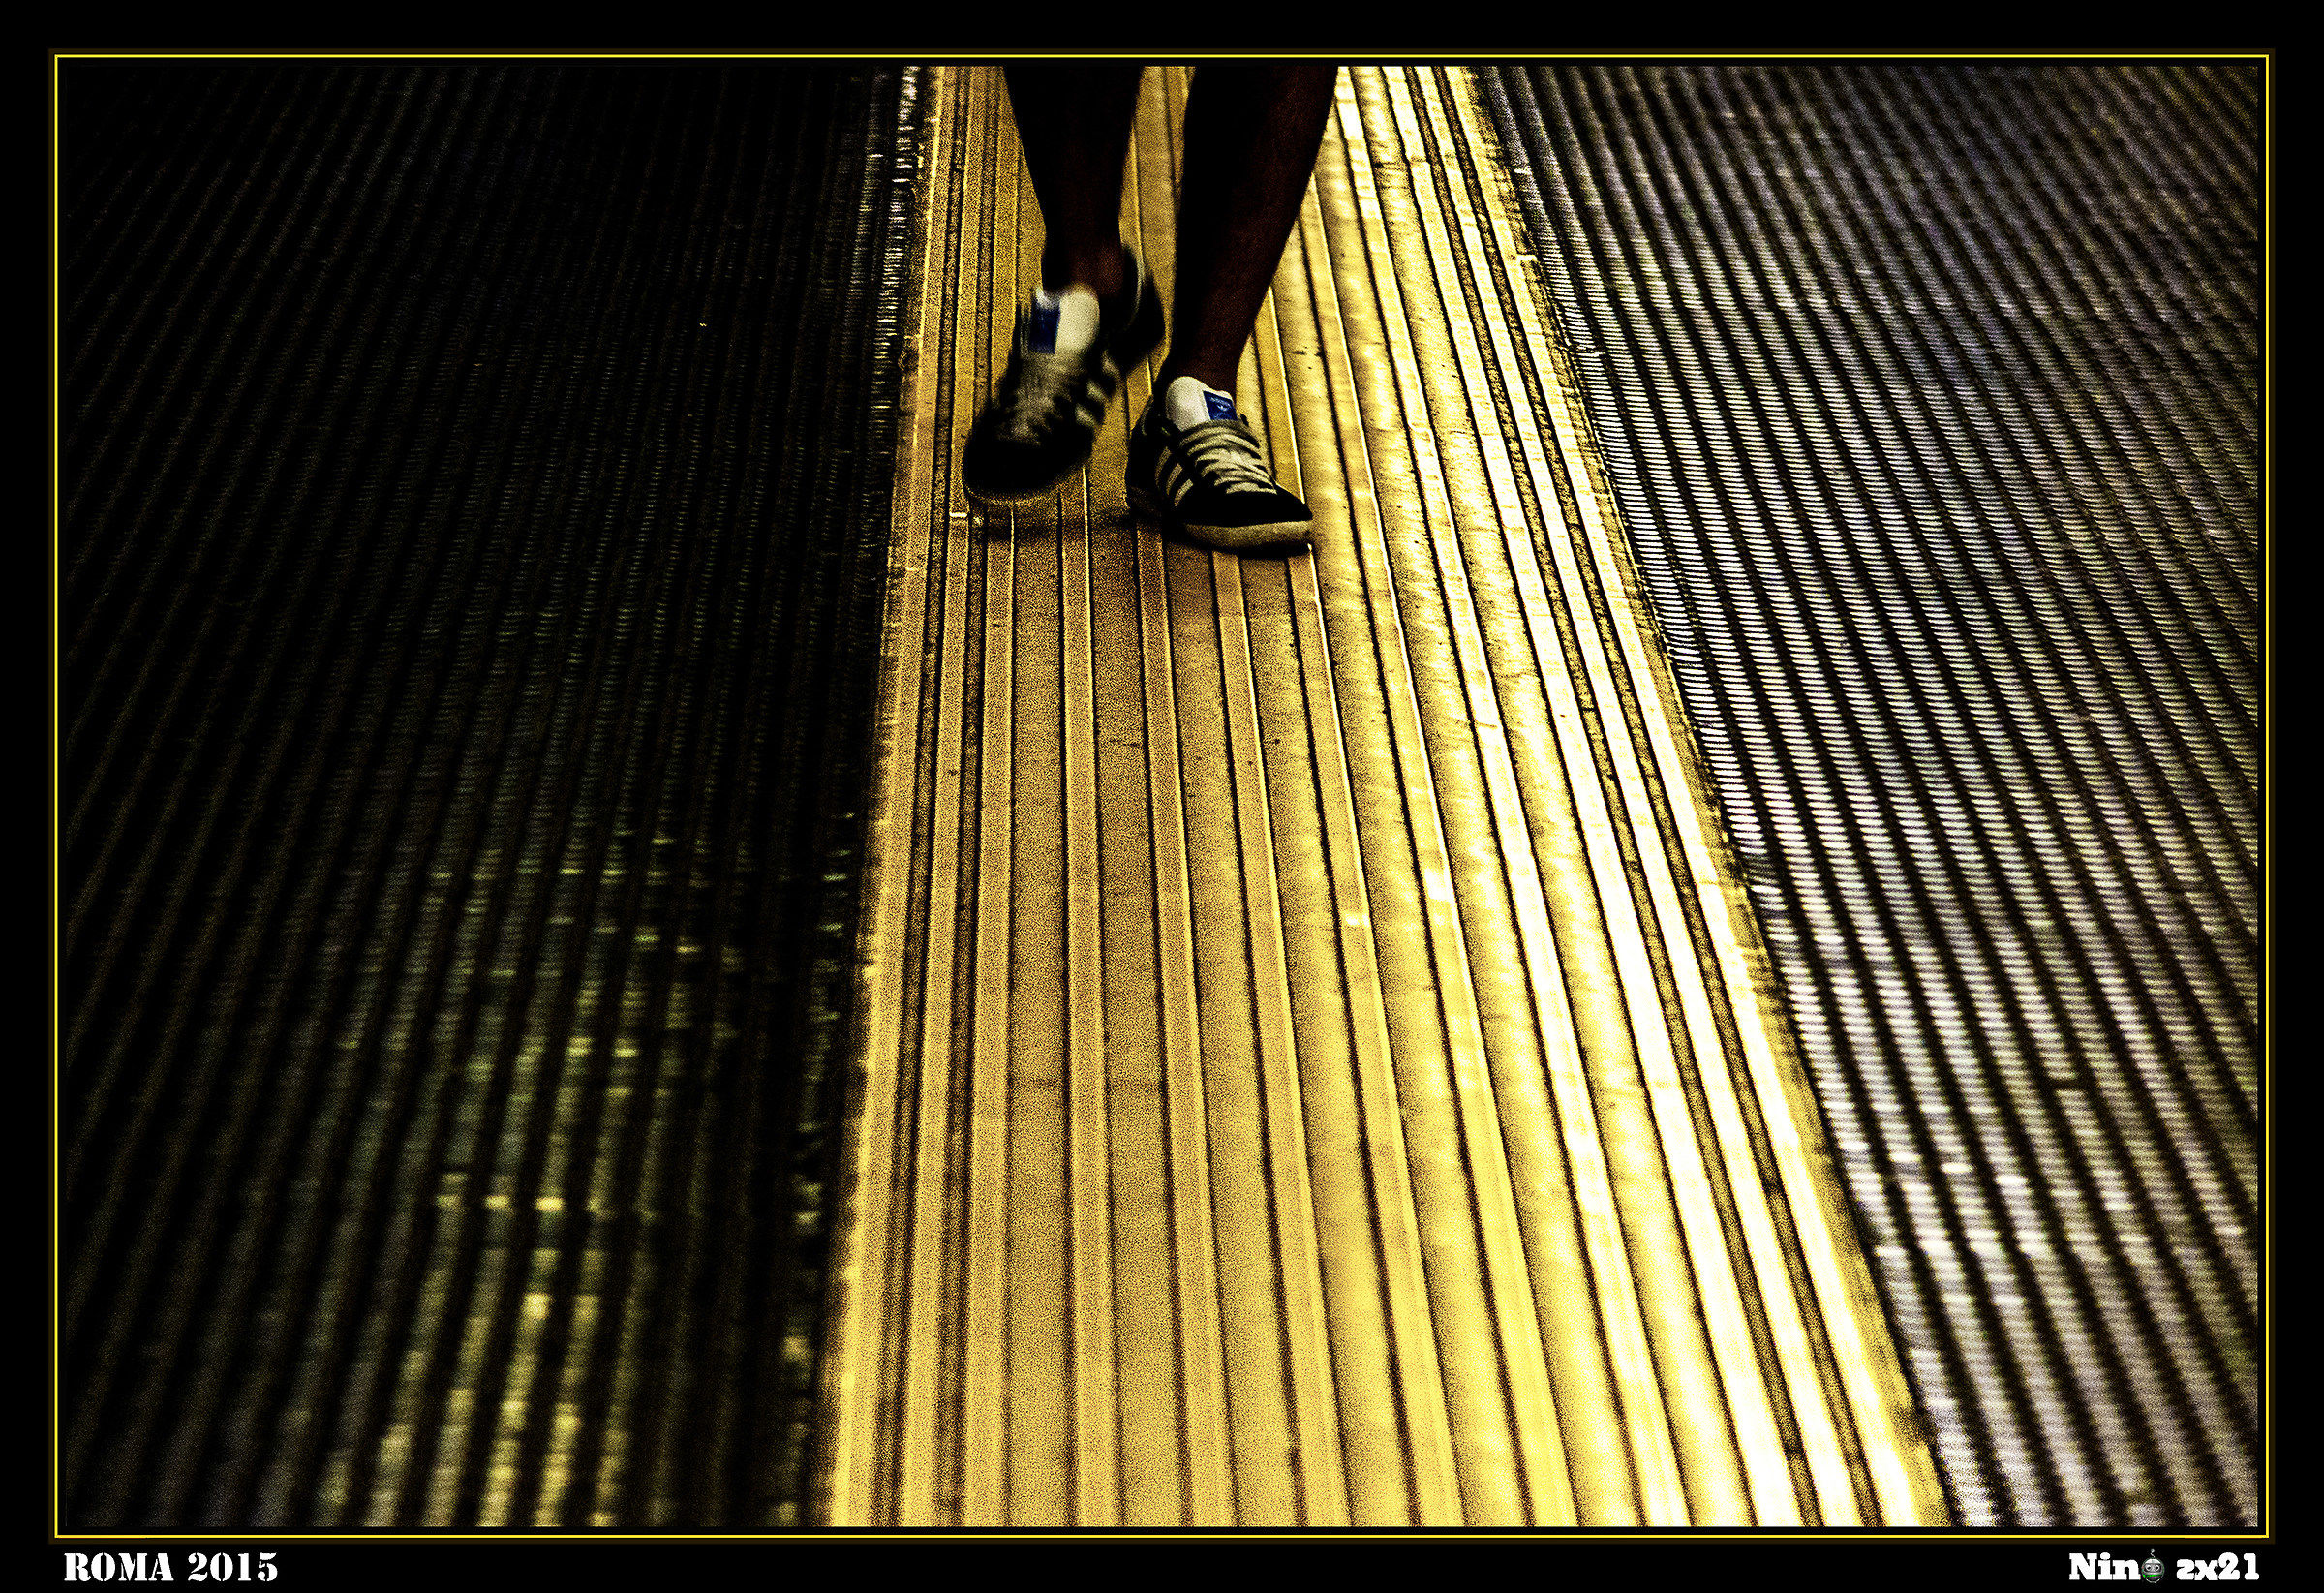 The Yellow Line...